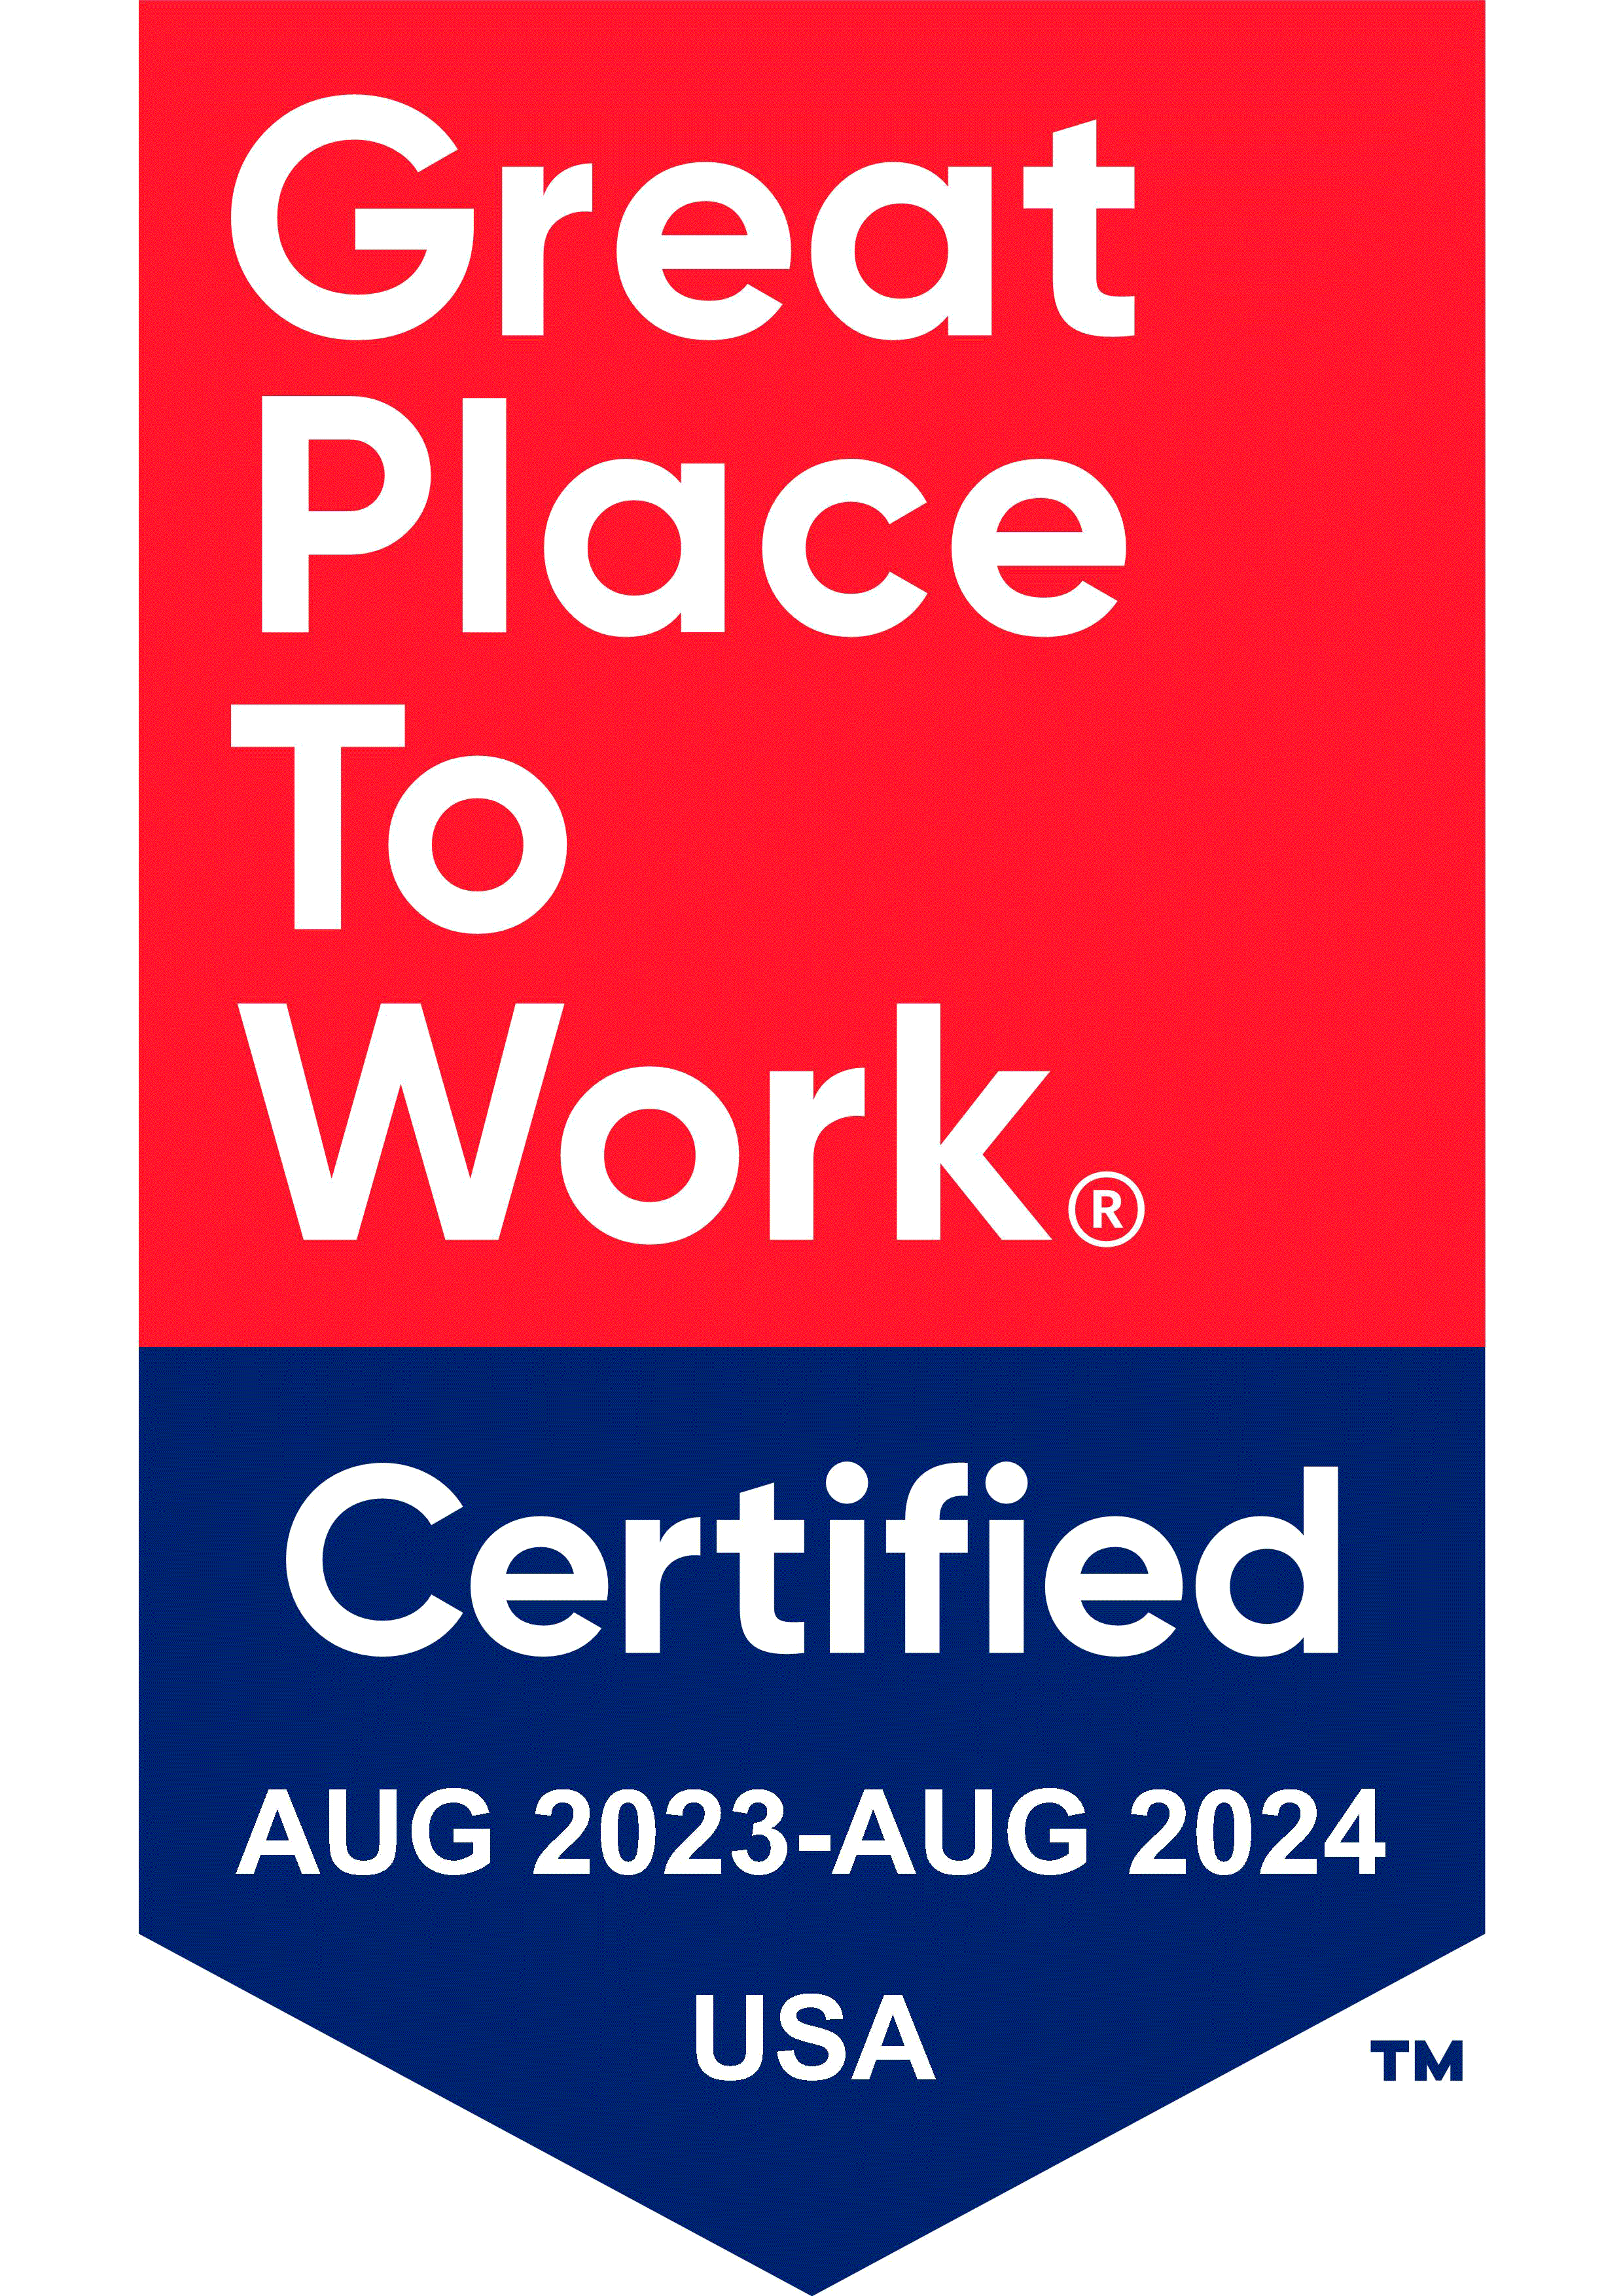 Red and blue Great Place to Work Certified logo.